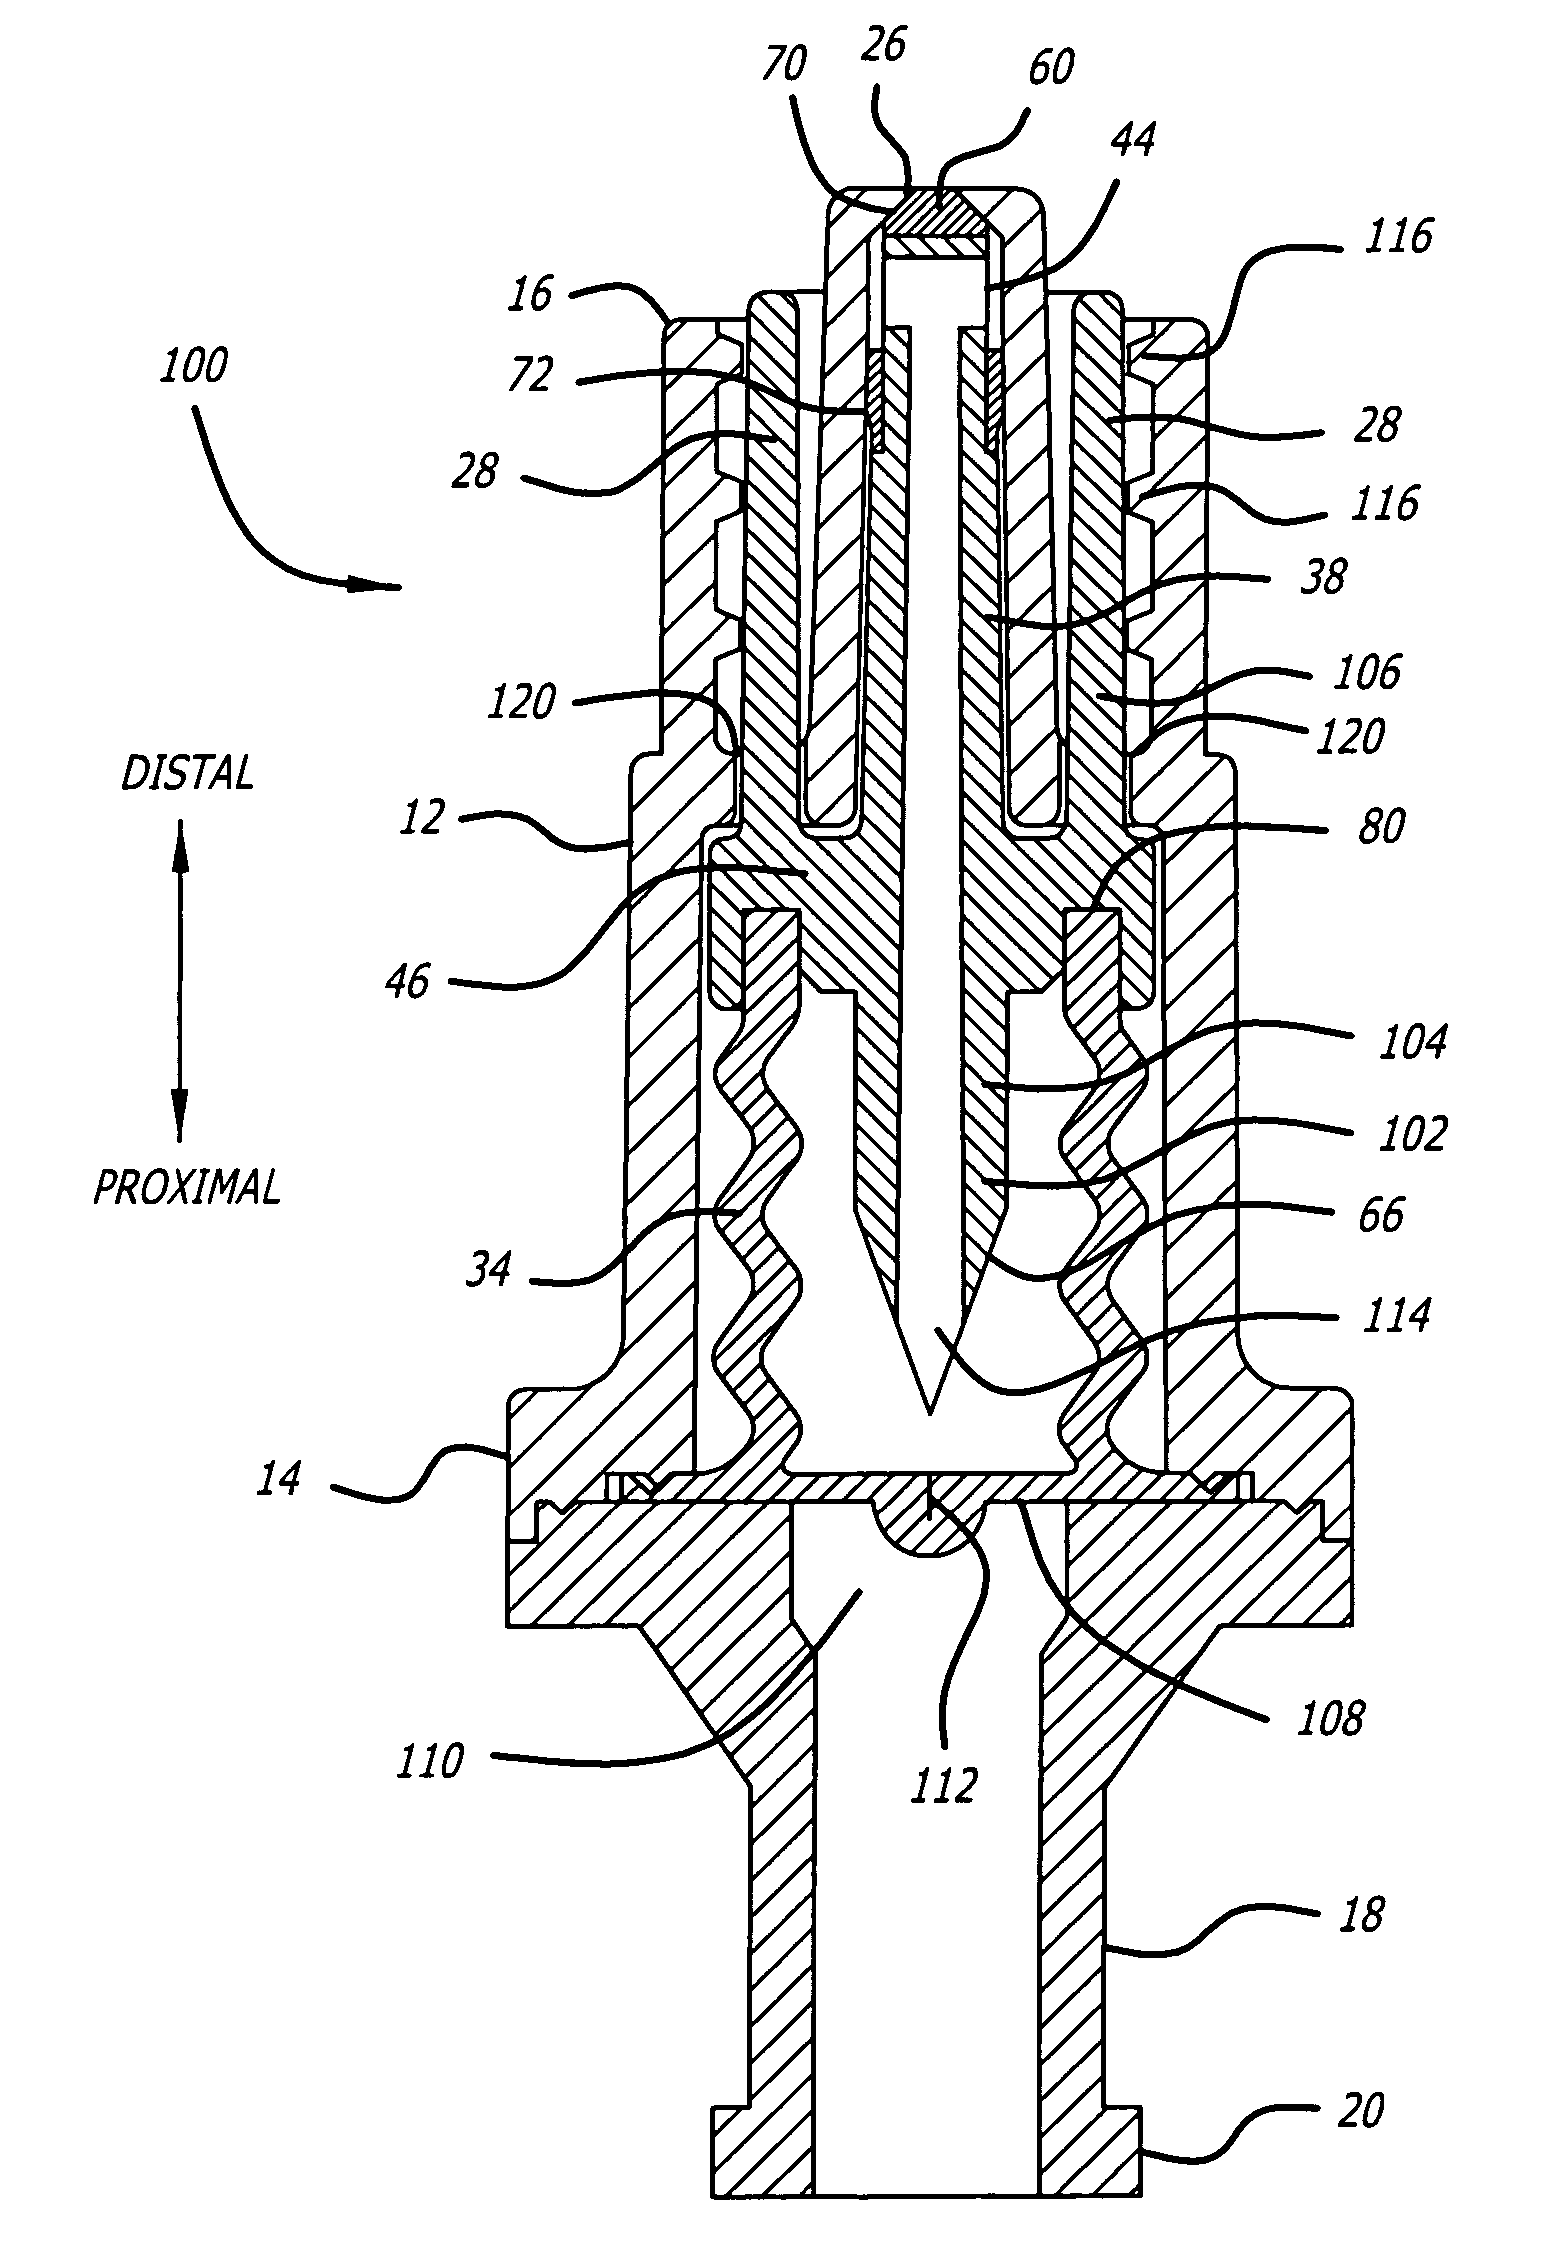 Self-sealing male Luer connector with multiple seals